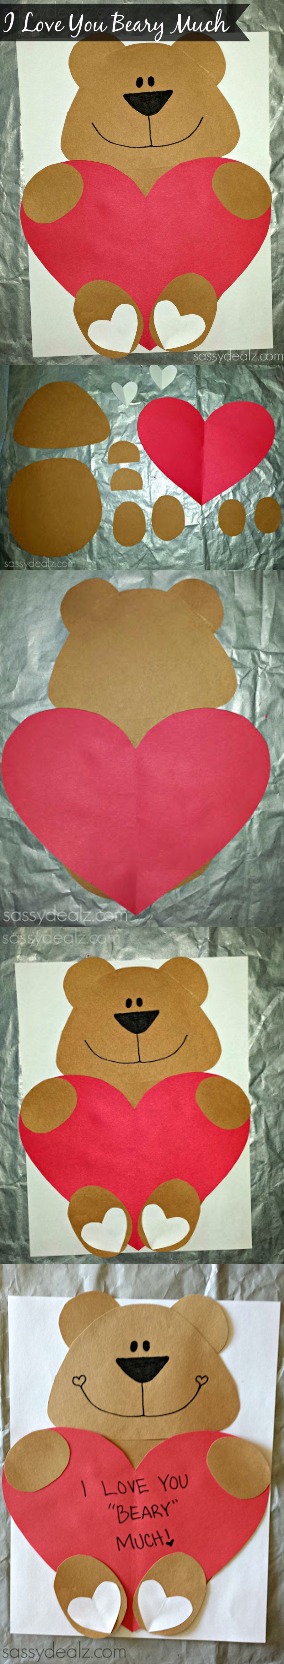 7-i-love-you-beary-much-valentine-bear-craft-for-kids